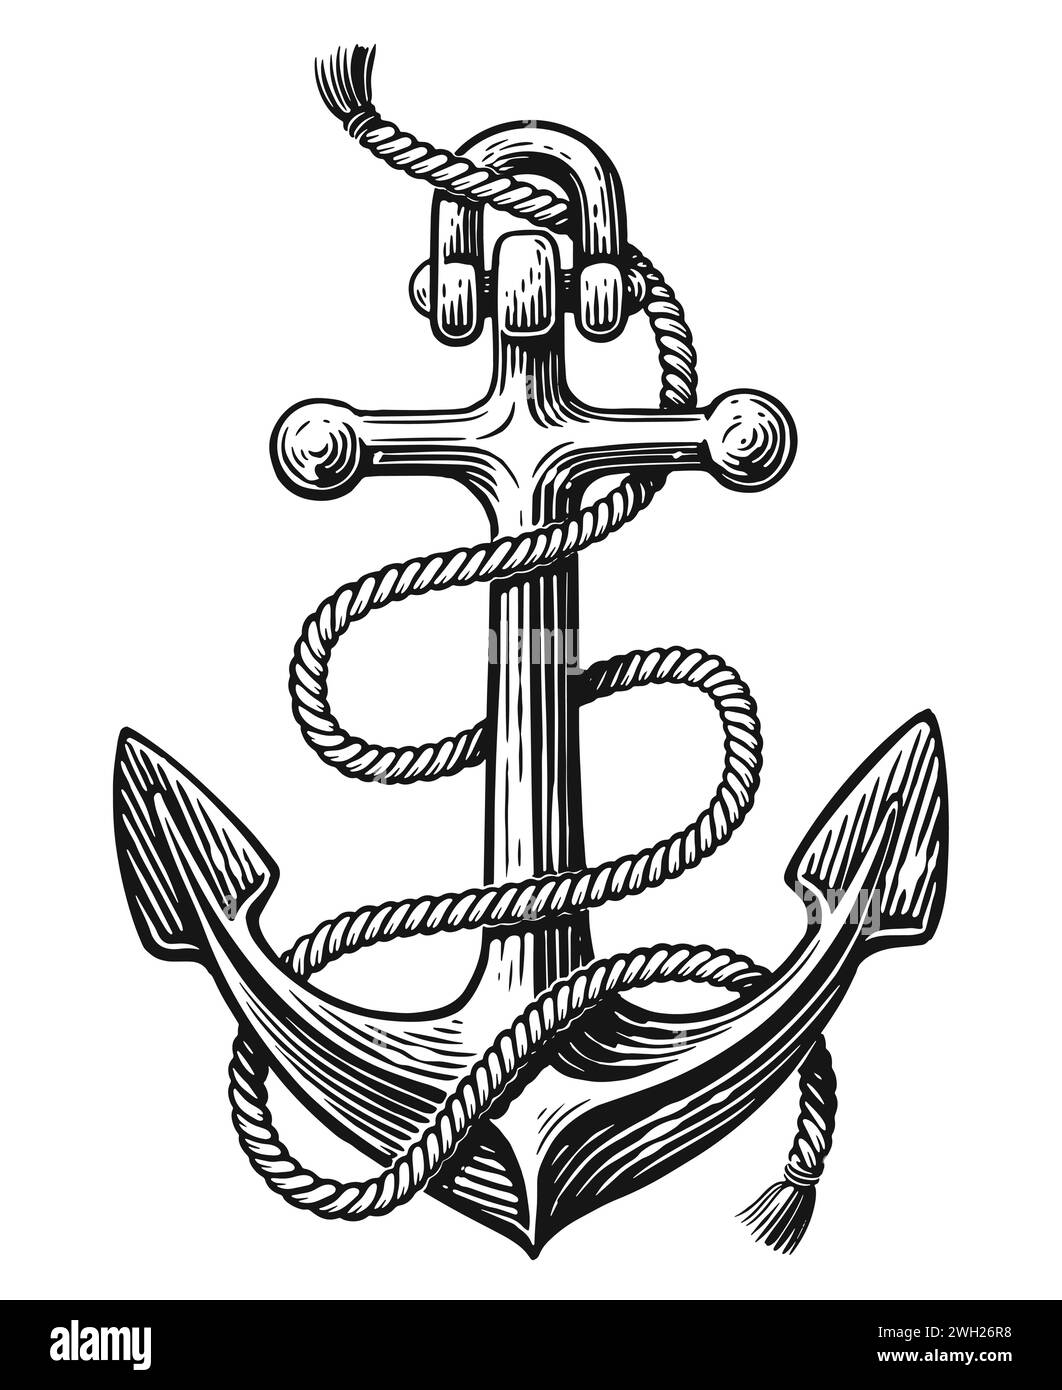 Ship sea Anchor with rope. Hand drawn sketch vintage vector illustration Stock Vector